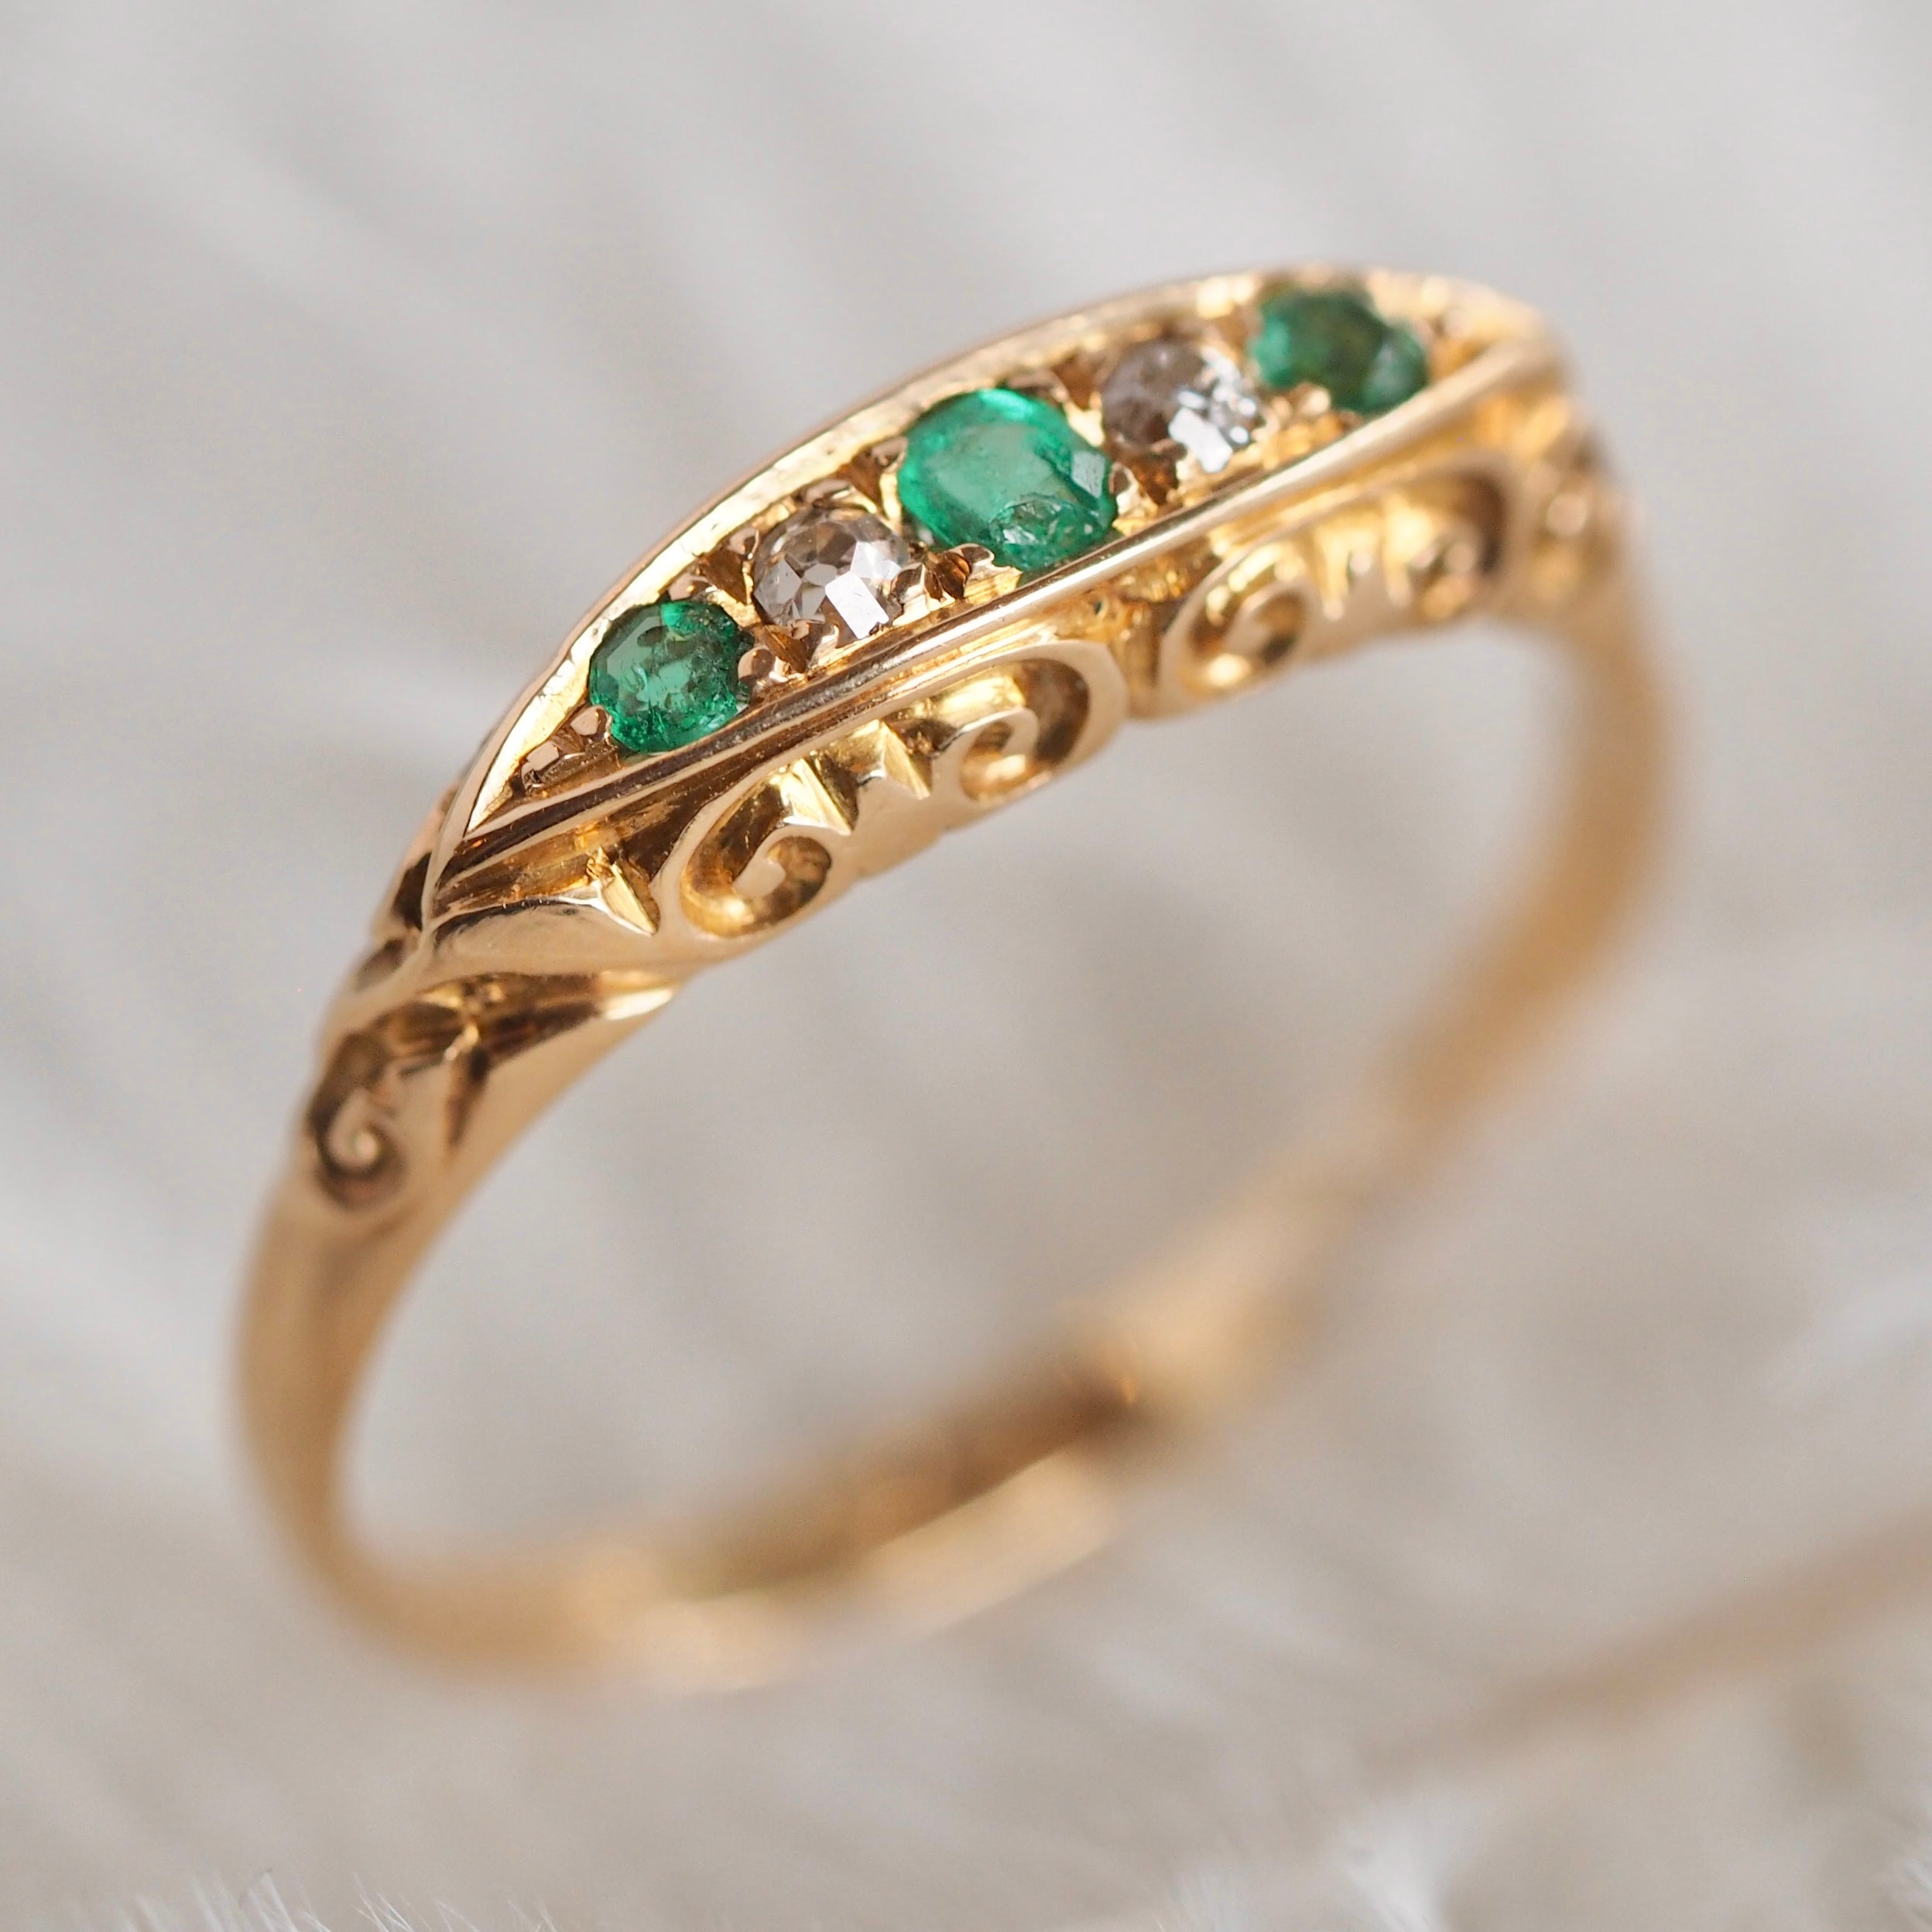 Antique Edwardian 18k Gold Emerald and Old Mine Cut Diamond Ring